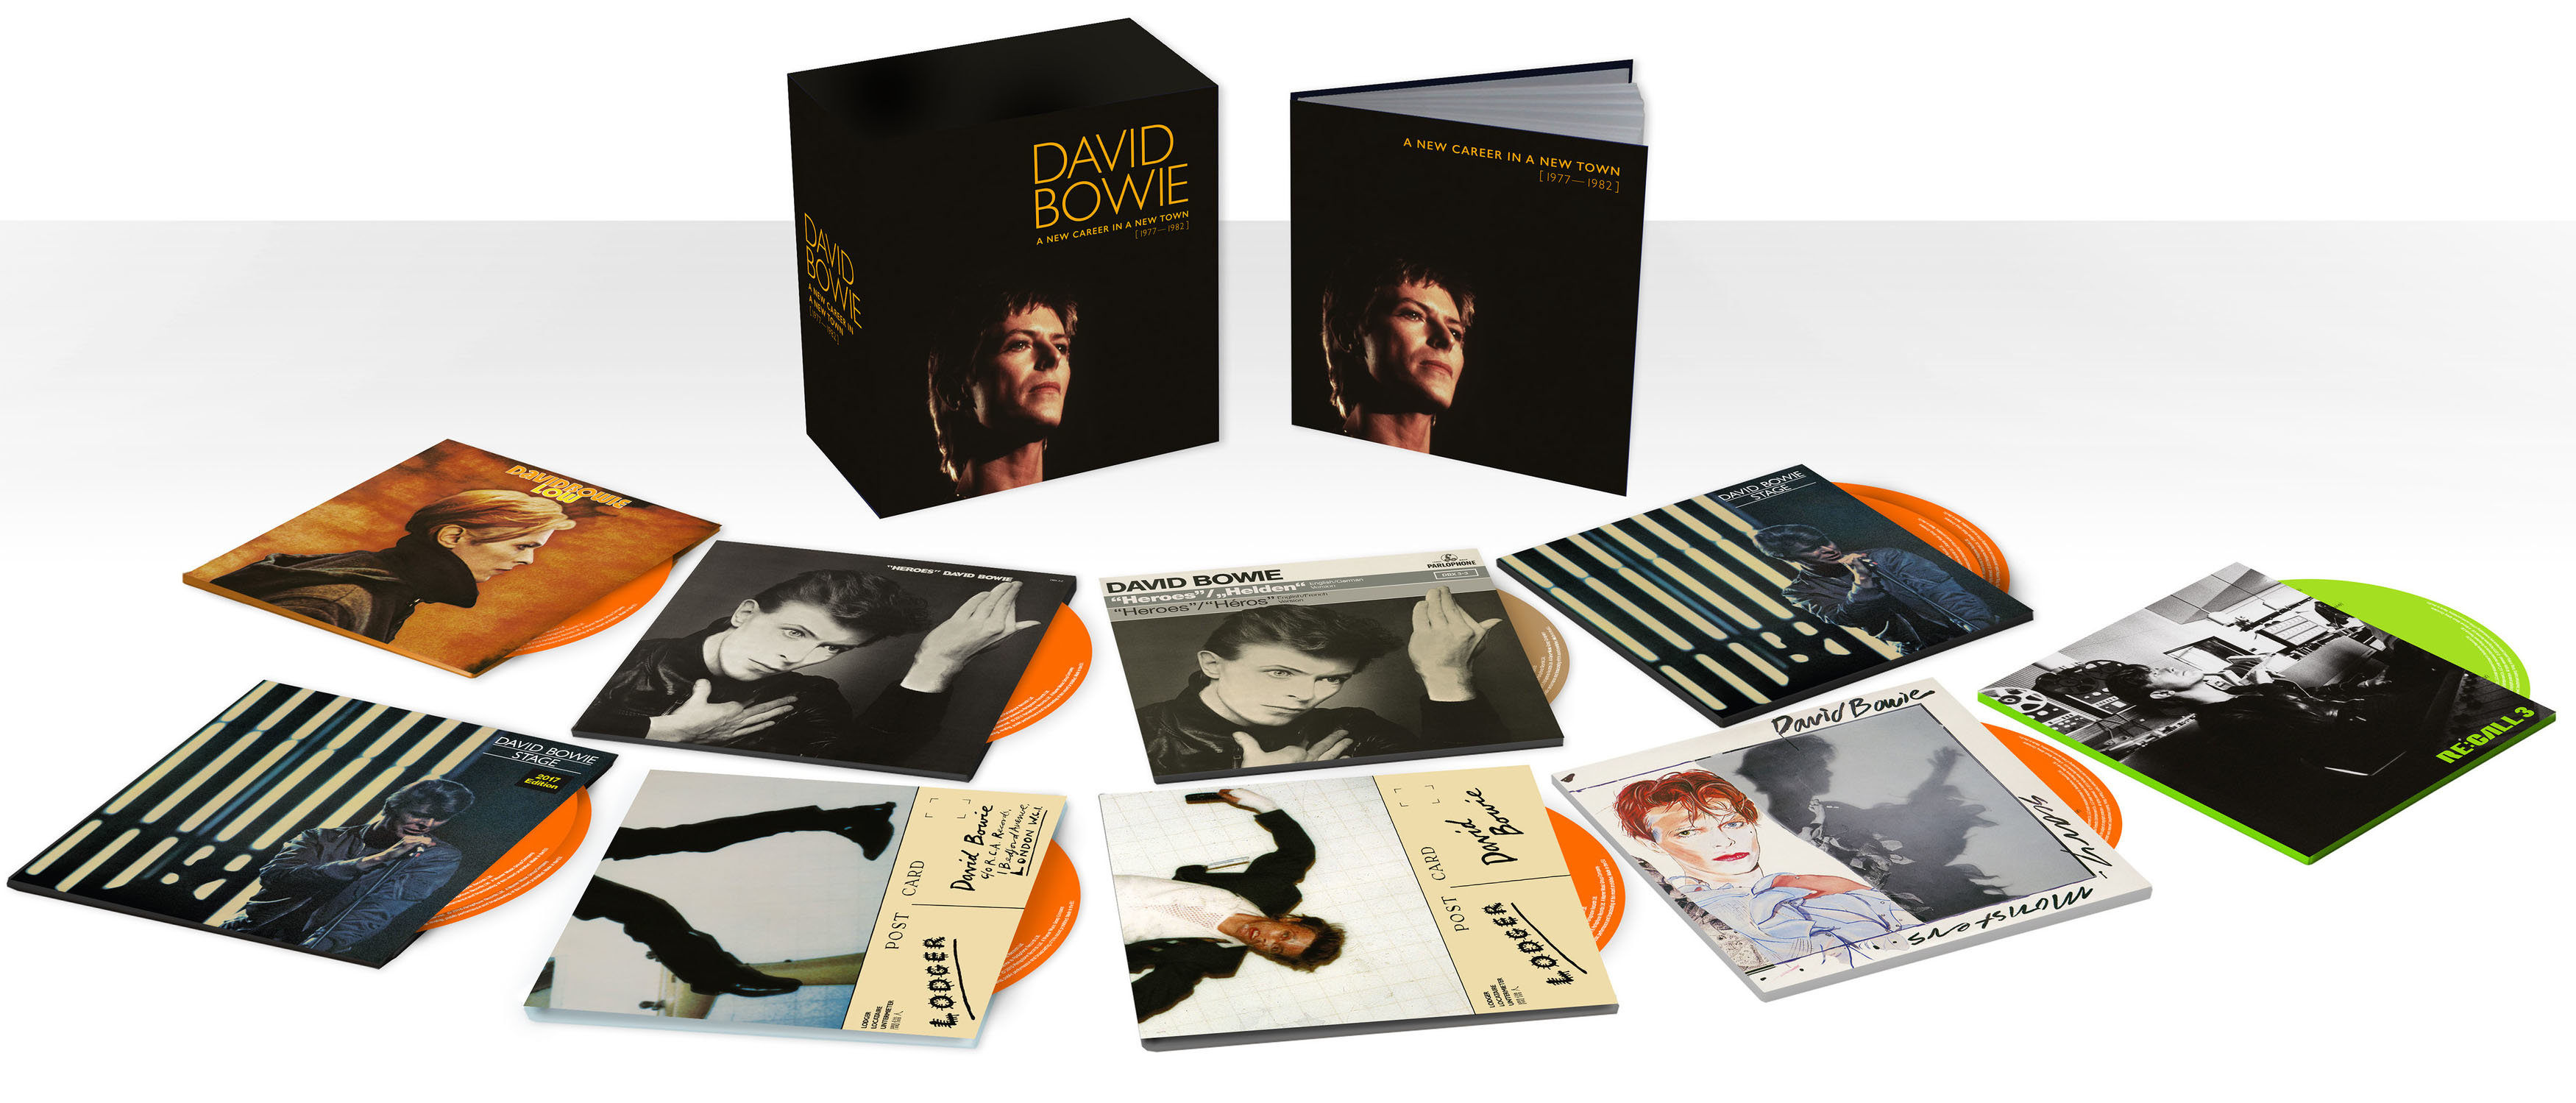 David Bowie : A New Carreer In A New Town (1977 - 1982)